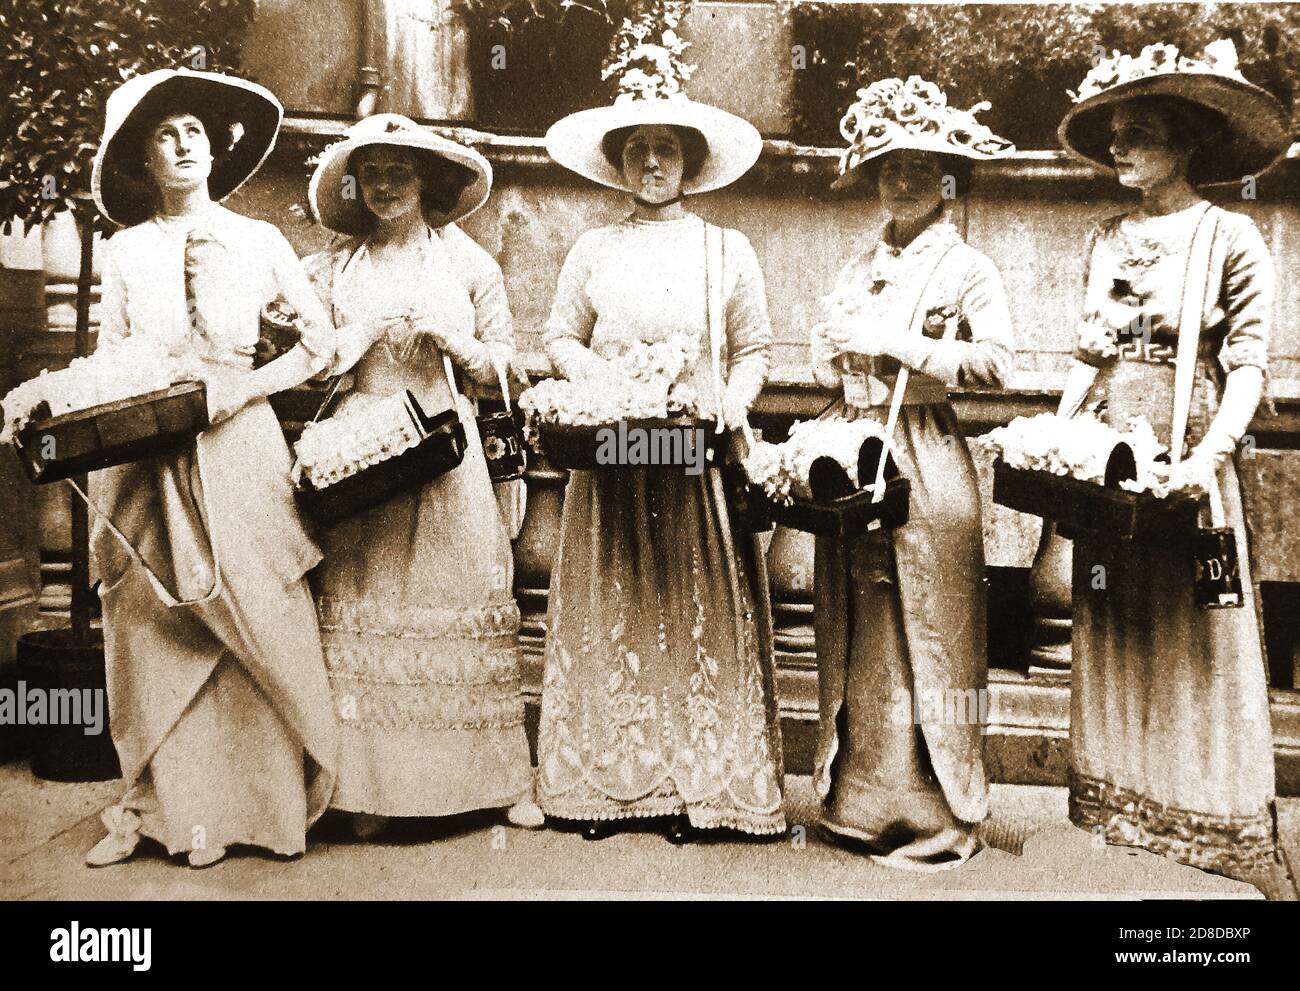 1912 . An old photograph of five women  selling roses for charity on the very first Alexandra Rose Day  ------ The Alexandra Rose Day  (in June) is a charitable fund raising event held in the United Kingdom since 1912 by Alexandra Rose Charities. It was first launched on the 50th anniversary of the arrival of Queen Alexandra from her native Denmark to the U.K. The Queen requested that the anniversary be marked by the sale of artificial wild  roses in London made by young women and girls with disabilities from the John Groom Industrial Training Home,  to raise funds for her favourite charities. Stock Photo